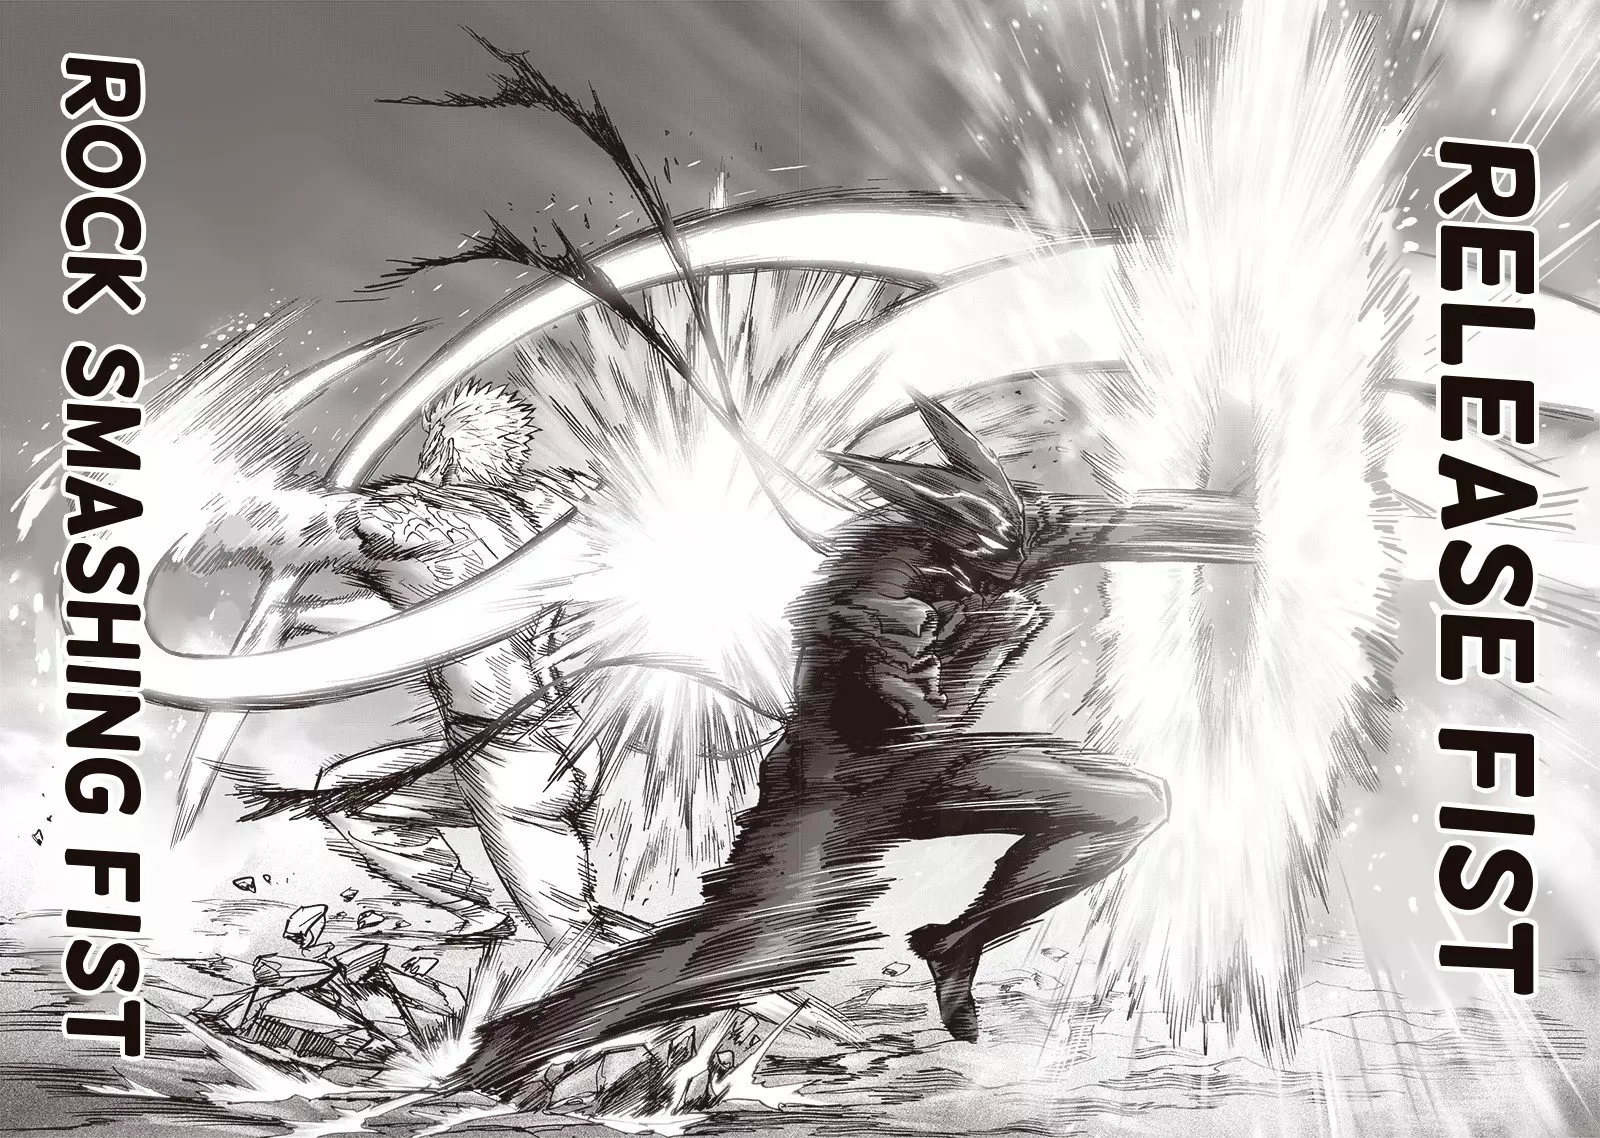 One Punch Man Chapter 153, READ One Punch Man Chapter 153 ONLINE, lost in the cloud genre,lost in the cloud gif,lost in the cloud girl,lost in the cloud goods,lost in the cloud goodreads,lost in the cloud,lost ark cloud gaming,lost odyssey cloud gaming,lost in the cloud fanart,lost in the cloud fanfic,lost in the cloud fandom,lost in the cloud first kiss,lost in the cloud font,lost in the cloud ending,lost in the cloud episode 97,lost in the cloud edit,lost in the cloud explained,lost in the cloud dog,lost in the cloud discord server,lost in the cloud desktop wallpaper,lost in the cloud drawing,can't find my cloud on network,lost in the cloud characters,lost in the cloud chapter 93 release date,lost in the cloud birthday,lost in the cloud birthday art,lost in the cloud background,lost in the cloud banner,lost in the clouds meaning,what is the black cloud in lost,lost in the cloud ao3,lost in the cloud anime,lost in the cloud art,lost in the cloud author twitter,lost in the cloud author instagram,lost in the cloud artist,lost in the cloud acrylic stand,lost in the cloud artist twitter,lost in the cloud art style,lost in the cloud analysis